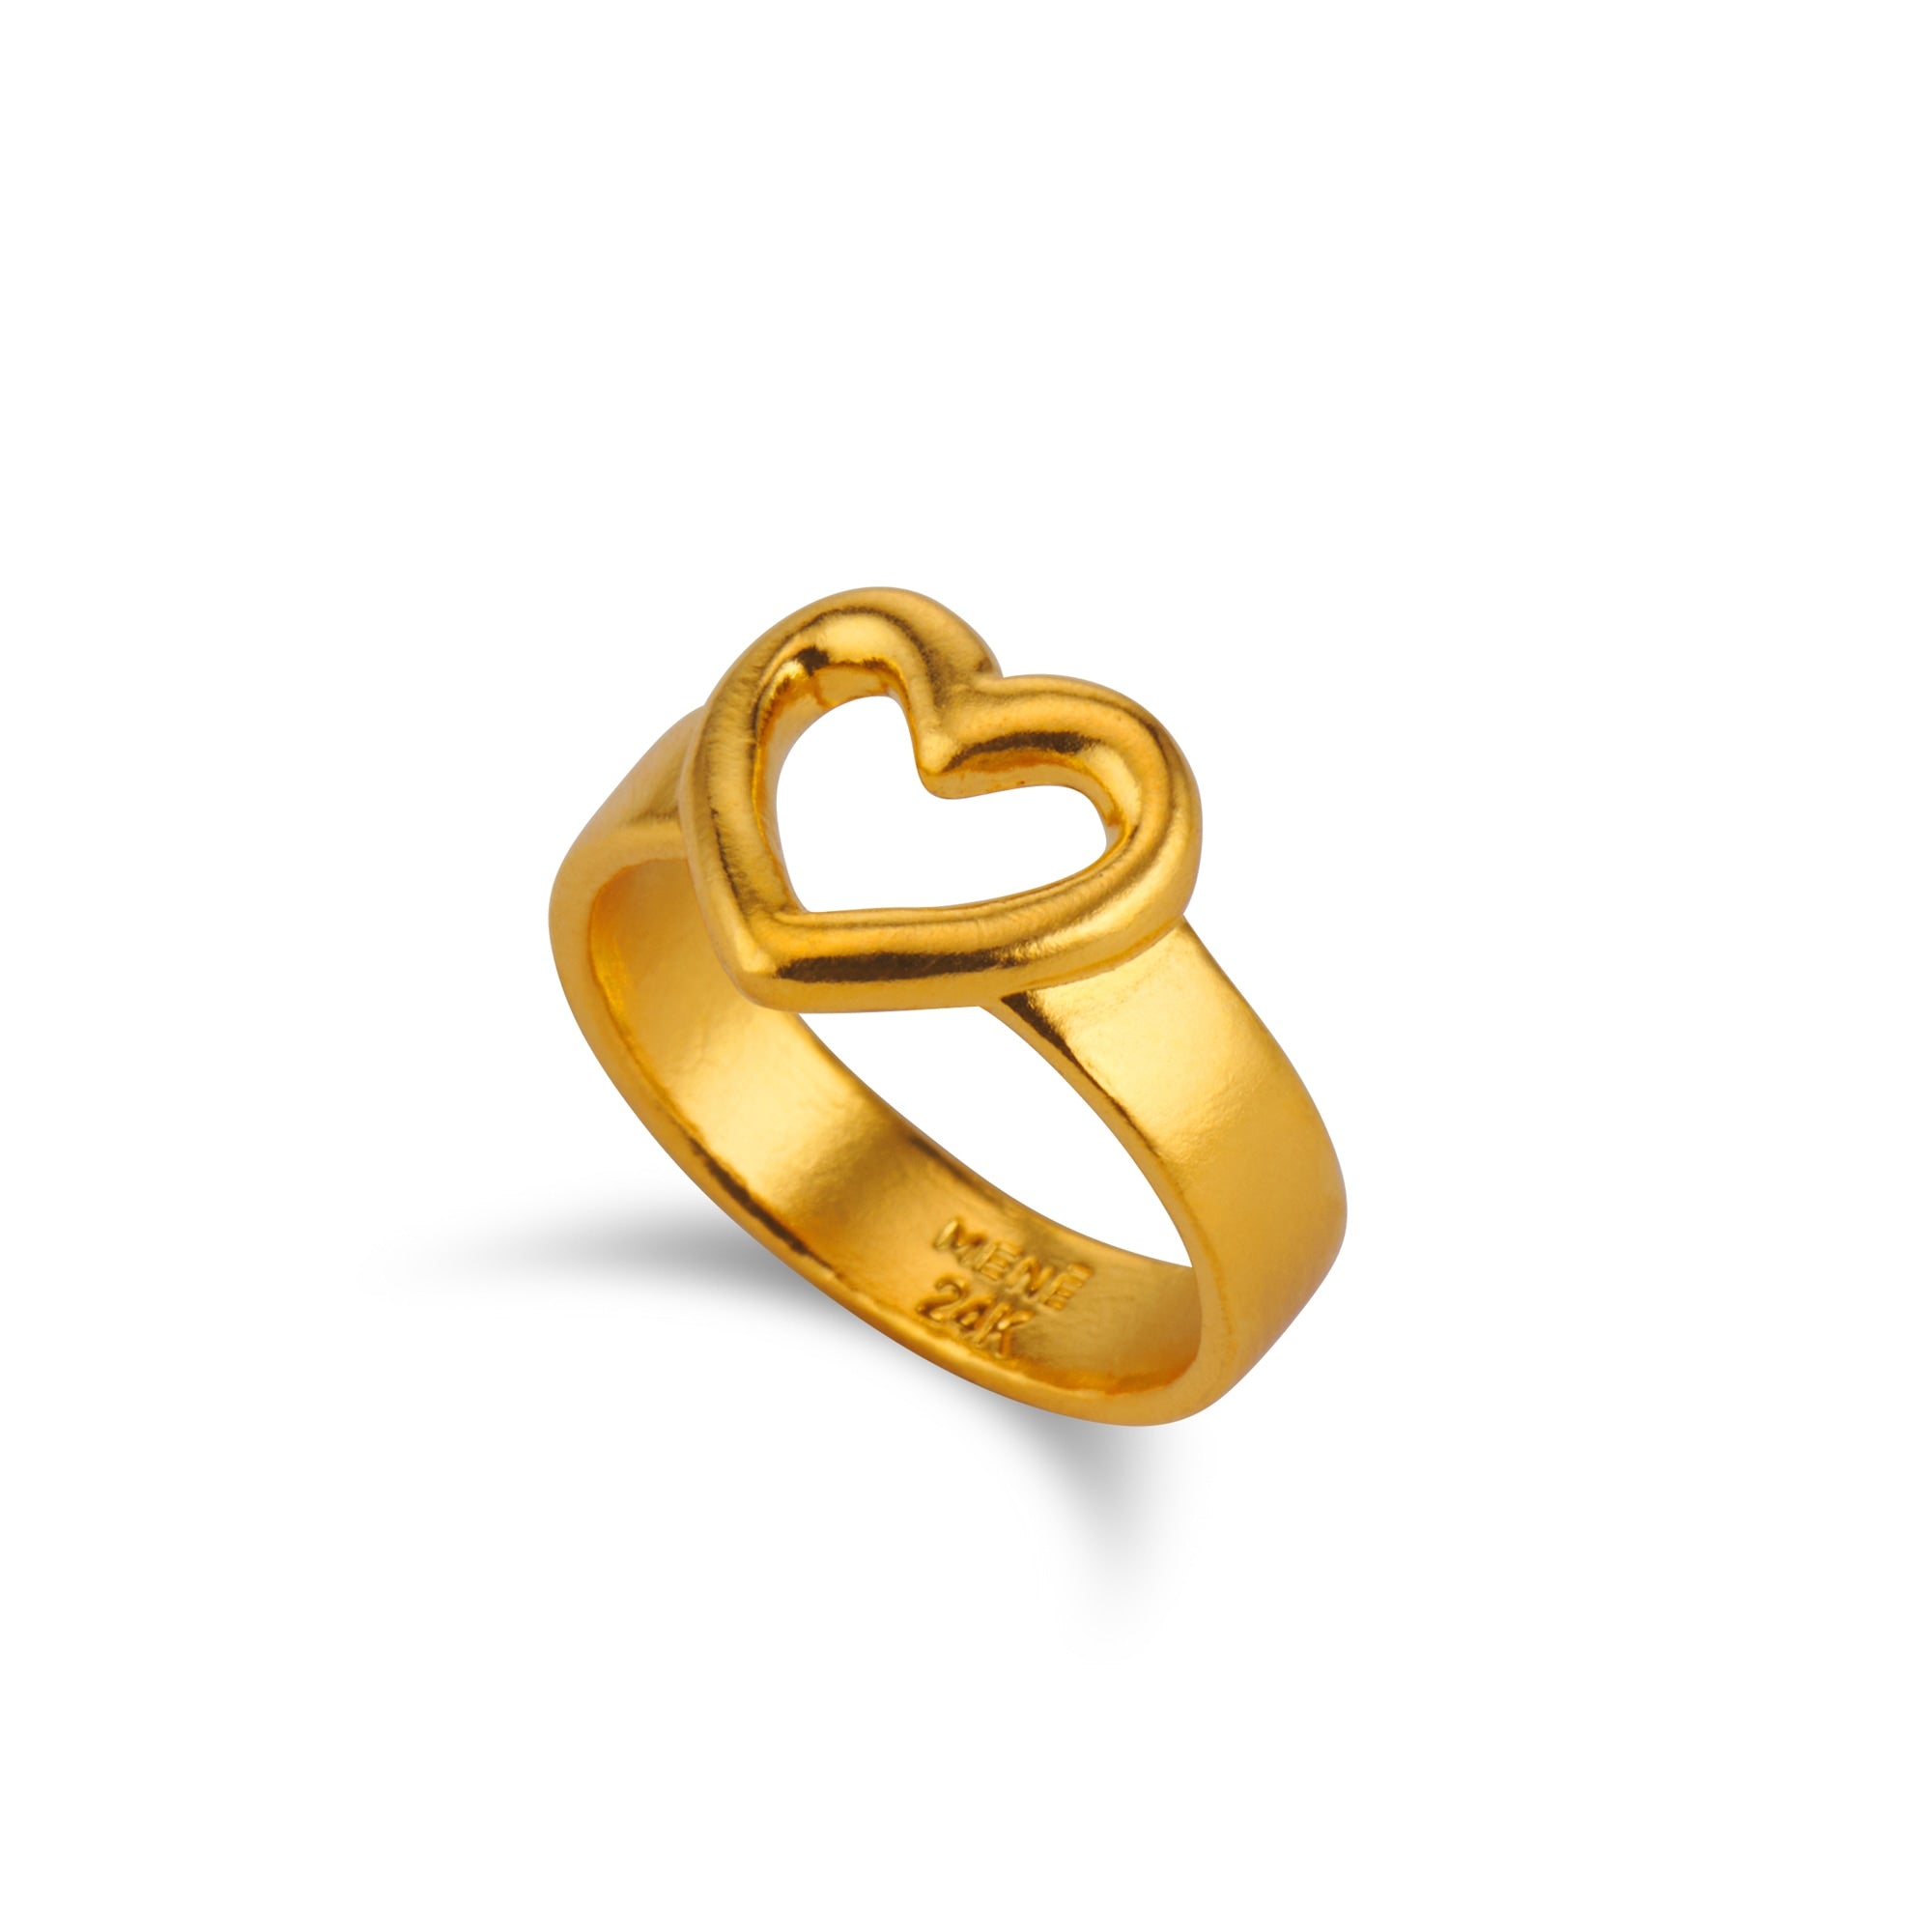 Double Heart Ring, 14K Gold Ring, Yellow Gold, Two Hearts Frame Ring | eBay